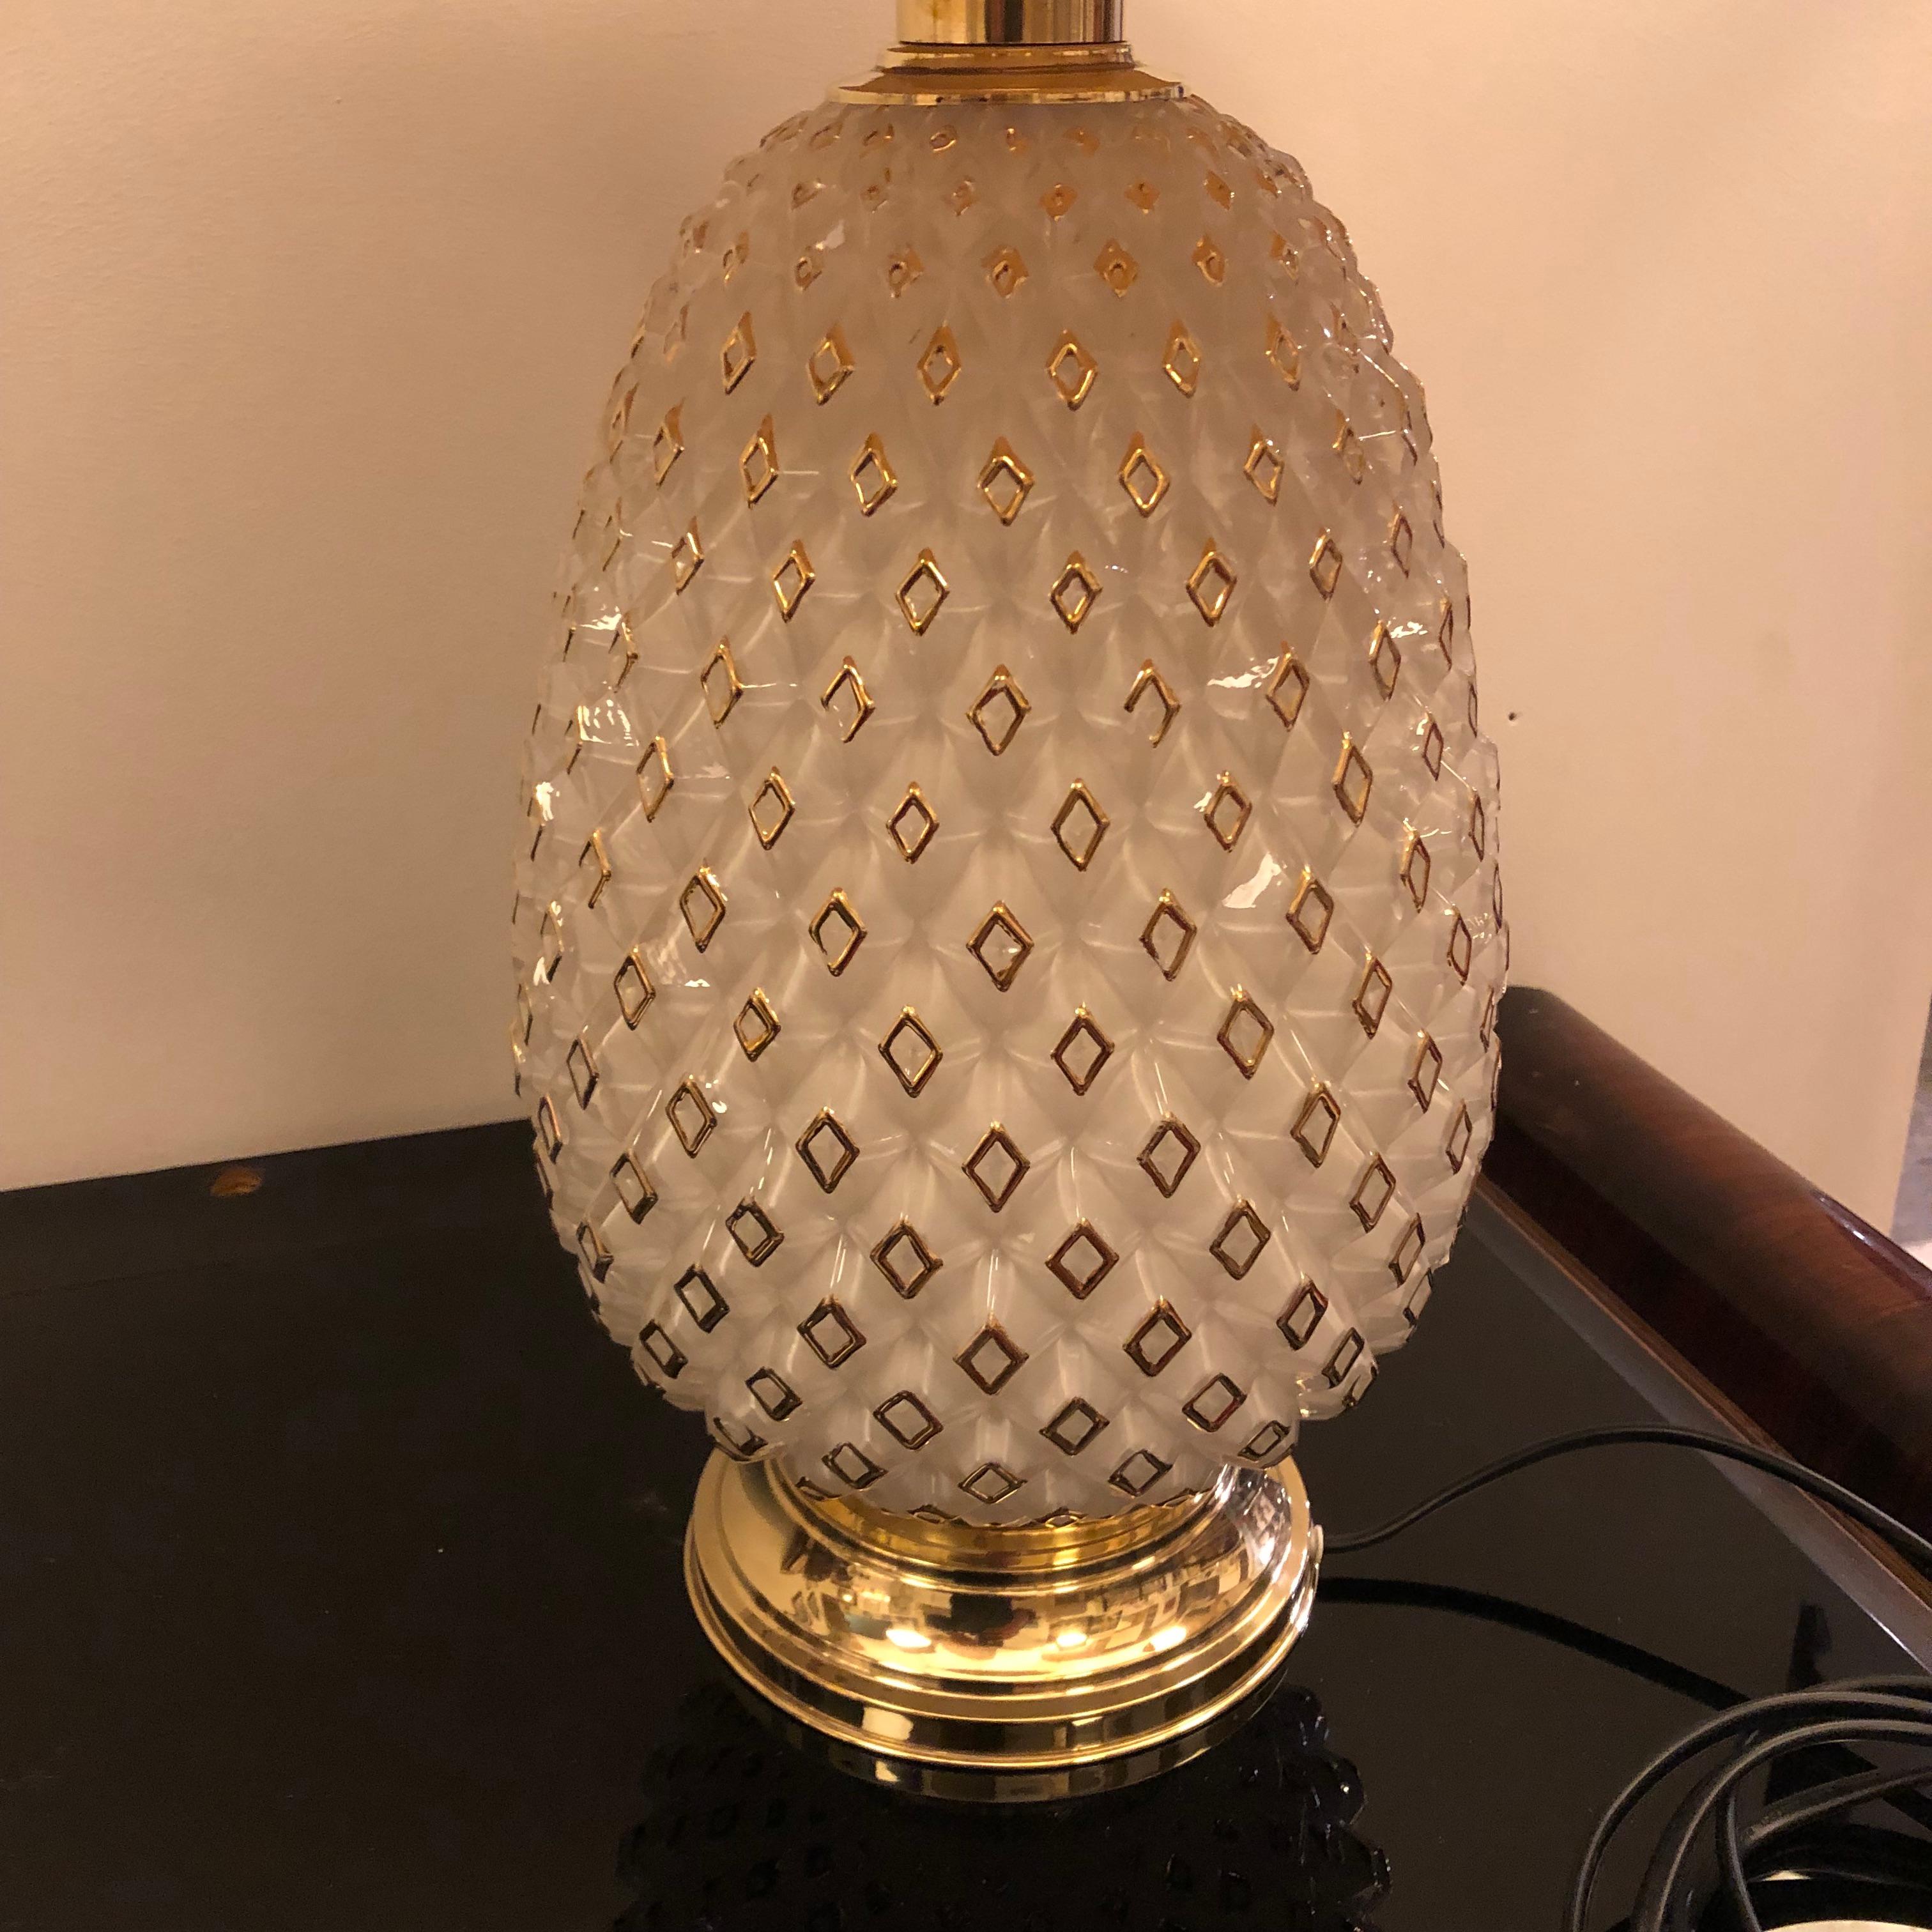 Particular pineapple table lamp made in Italy in the Sixties. White opaline glass is decorated with gold finiture, brass has been polished. It works 110-240 volts and need a regular e27 bulb. Sizes without lampshade diameter cm 17, height cm 48.